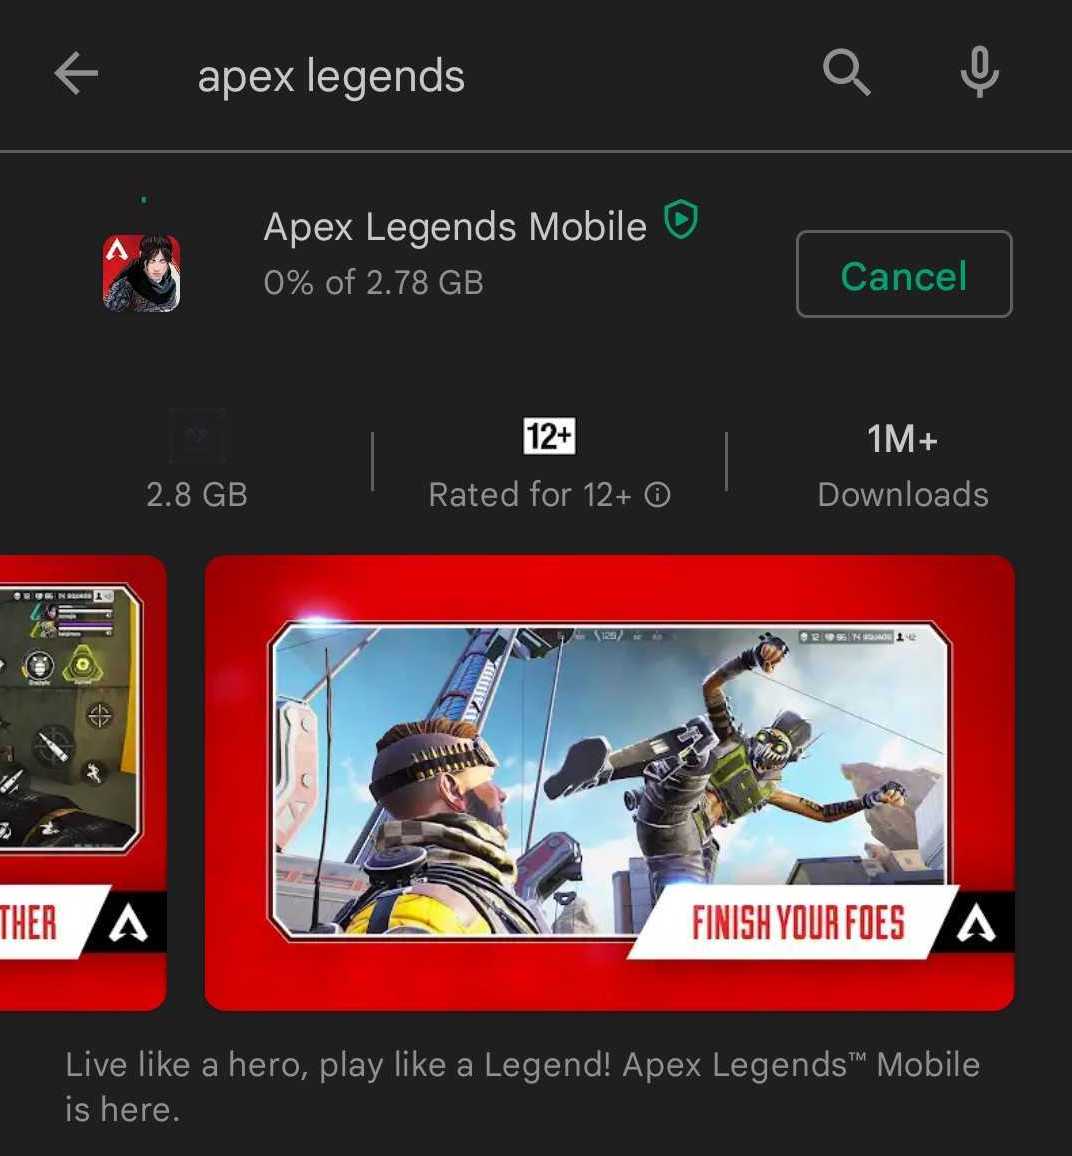 Apex Legends Mobile now available to download from Google Play